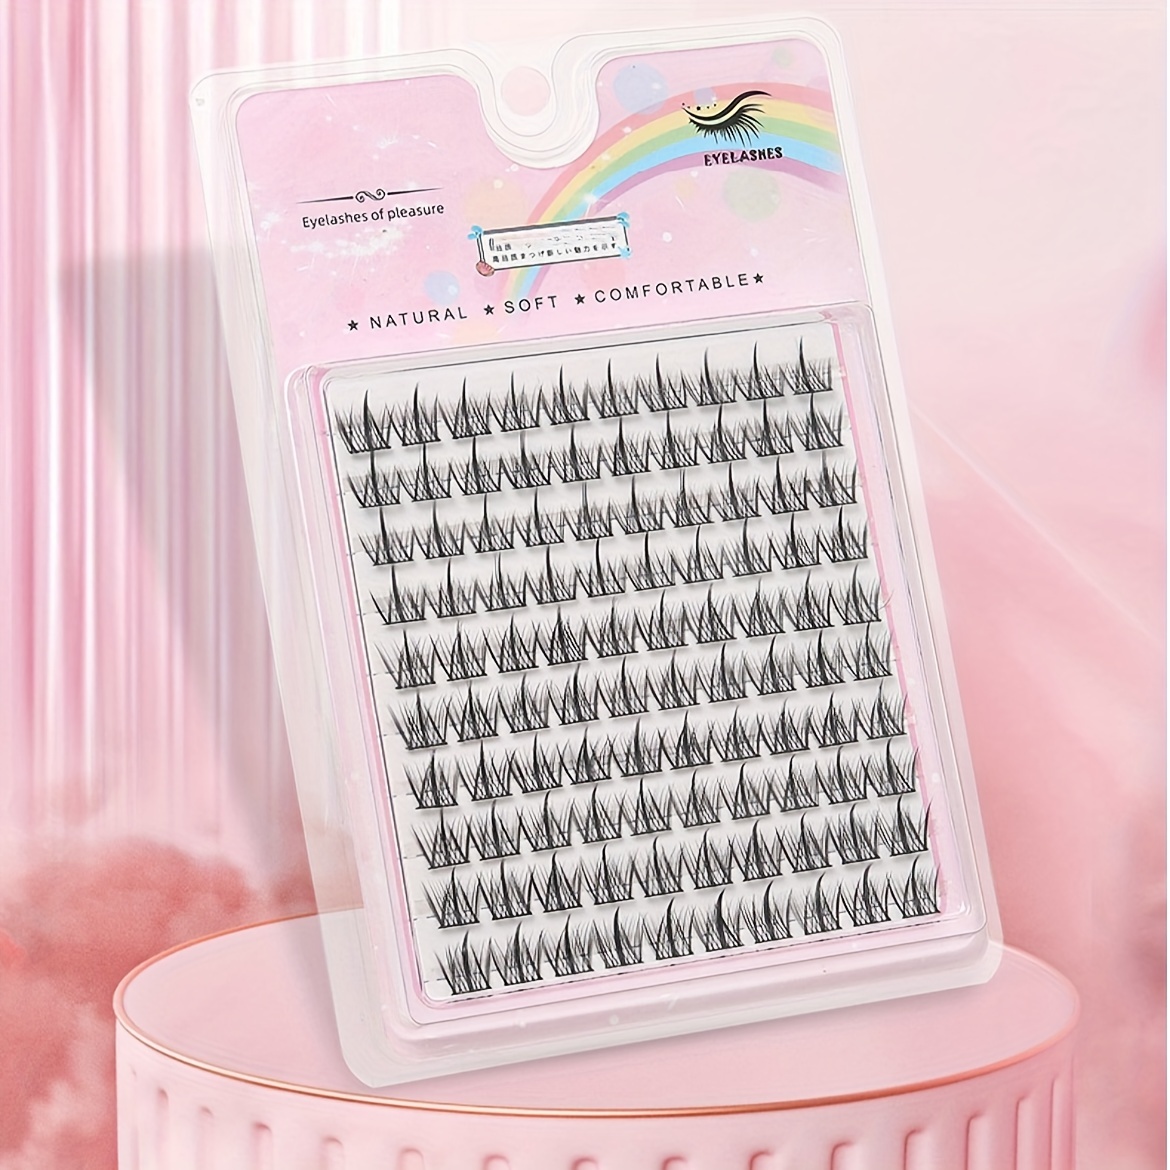 

100 C Curling Diy Eyelash Extensions - Individual Cluster Volume Lashes For Women - Perfect Valentine's Day Gift - Self Grafted Lashes At Home